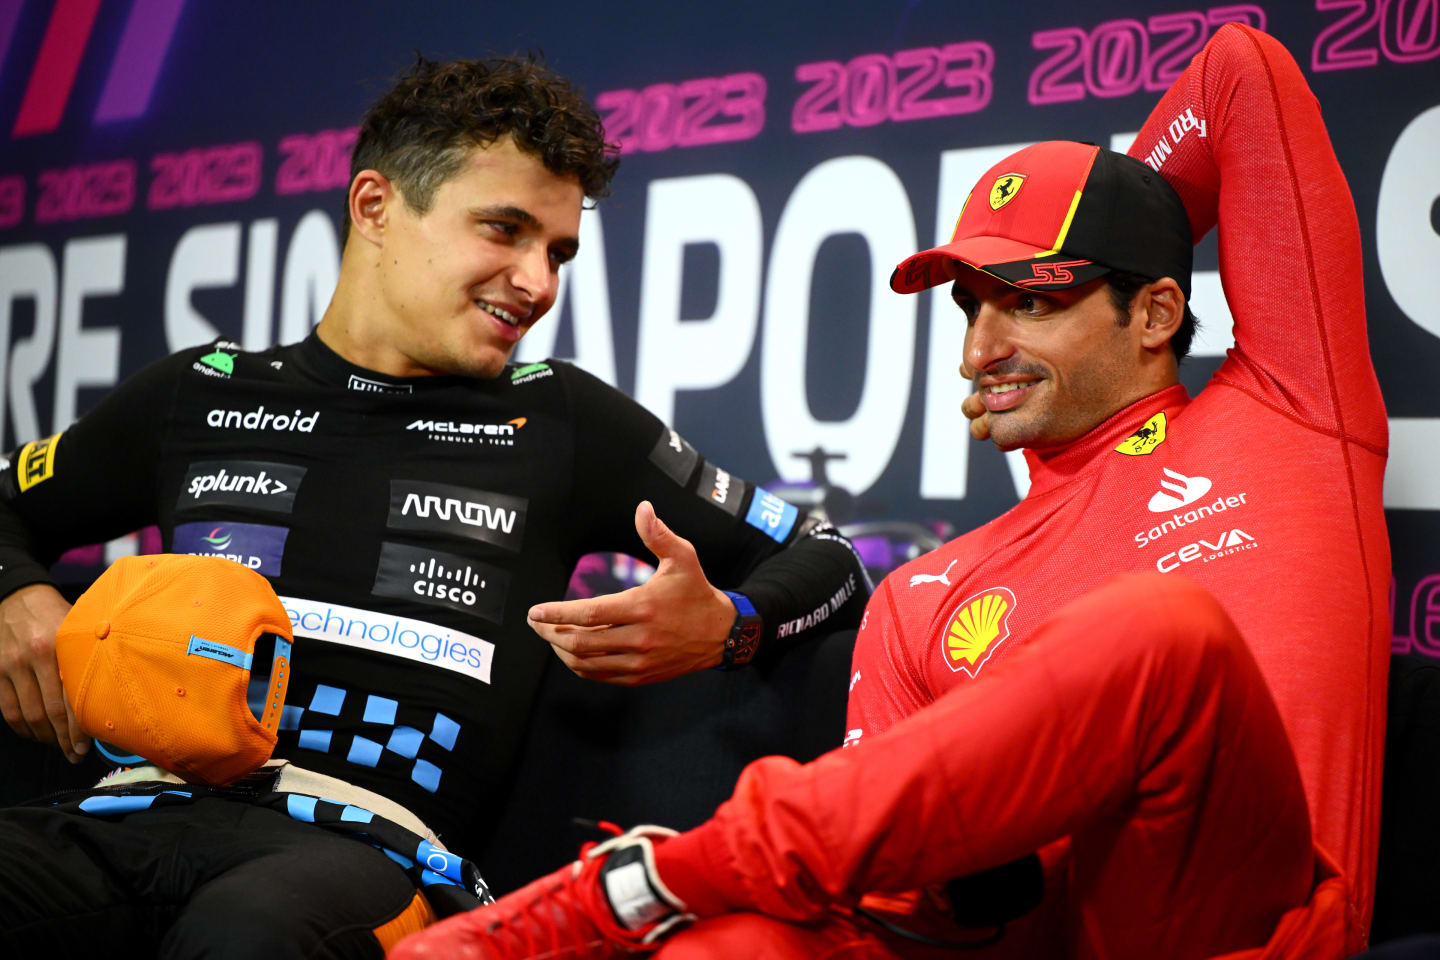 SINGAPORE, SINGAPORE - SEPTEMBER 17: Second placed Lando Norris of Great Britain and McLaren talks with race winner Carlos Sainz of Spain and Ferrari in a press conference after the F1 Grand Prix of Singapore at Marina Bay Street Circuit on September 17, 2023 in Singapore, Singapore. (Photo by Clive Mason/Getty Images)